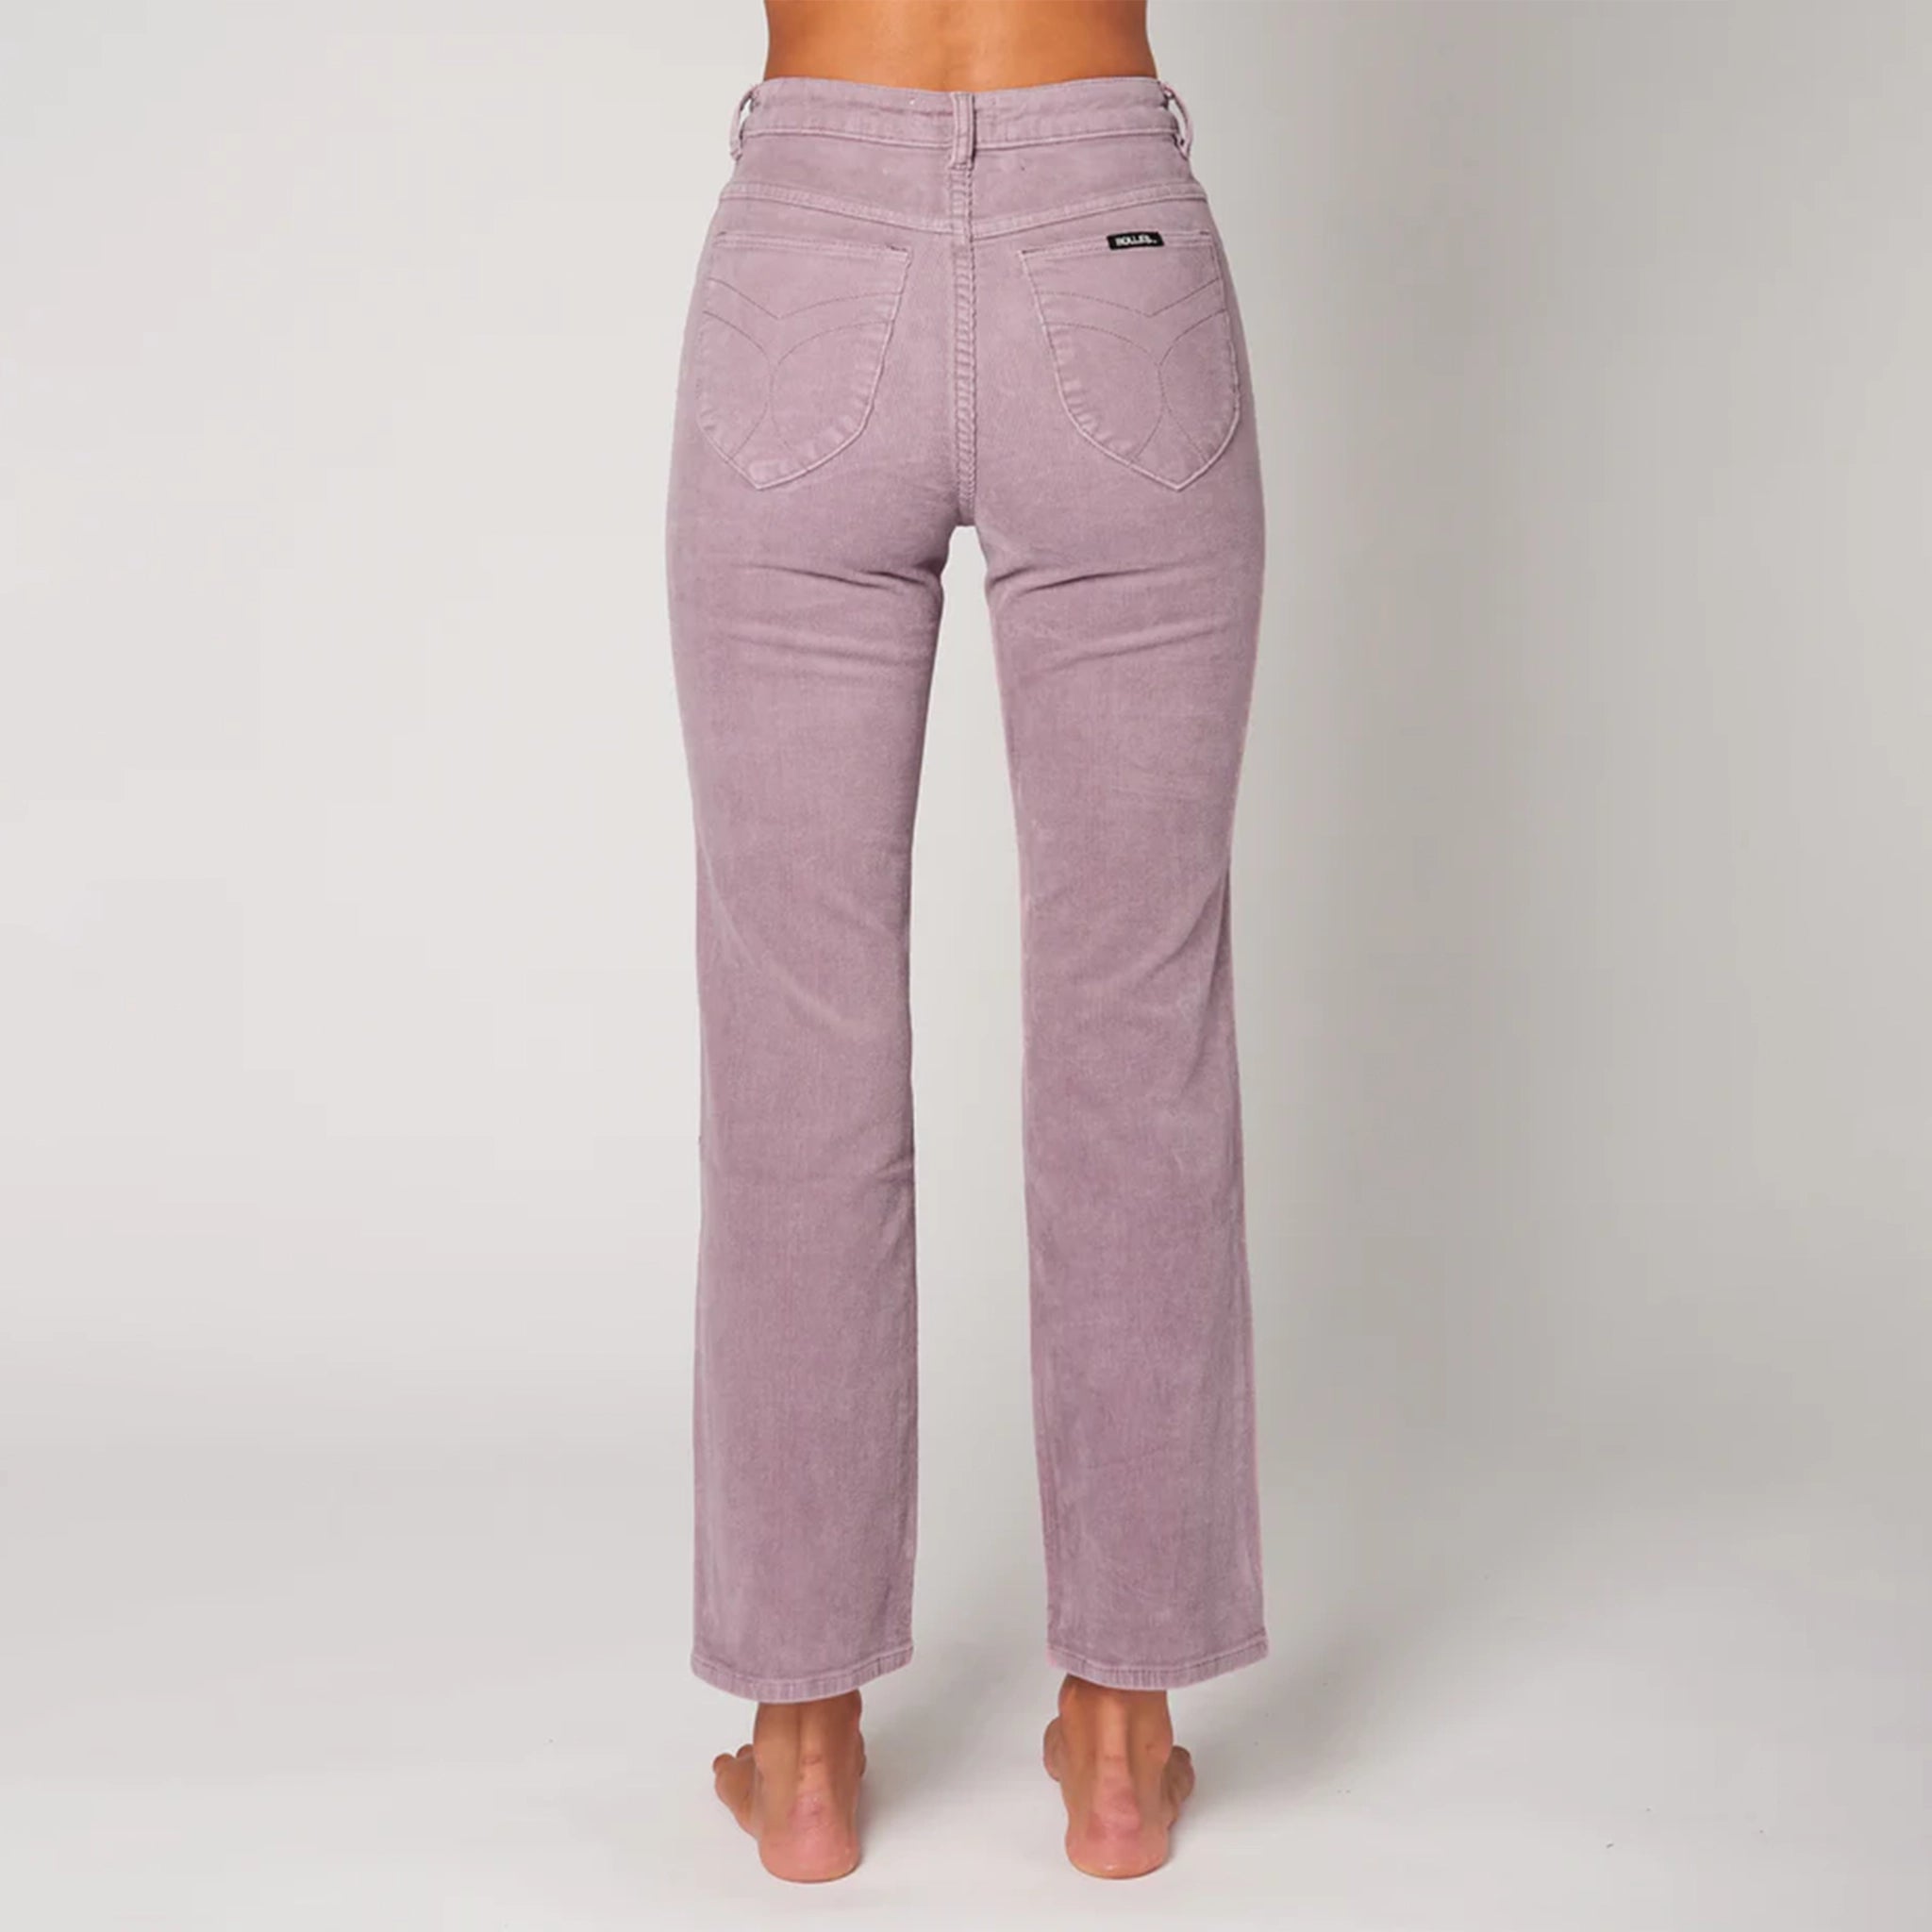 Straight legged corduroy pants with curved back pockets, a high waist and they come in a light purple shade.